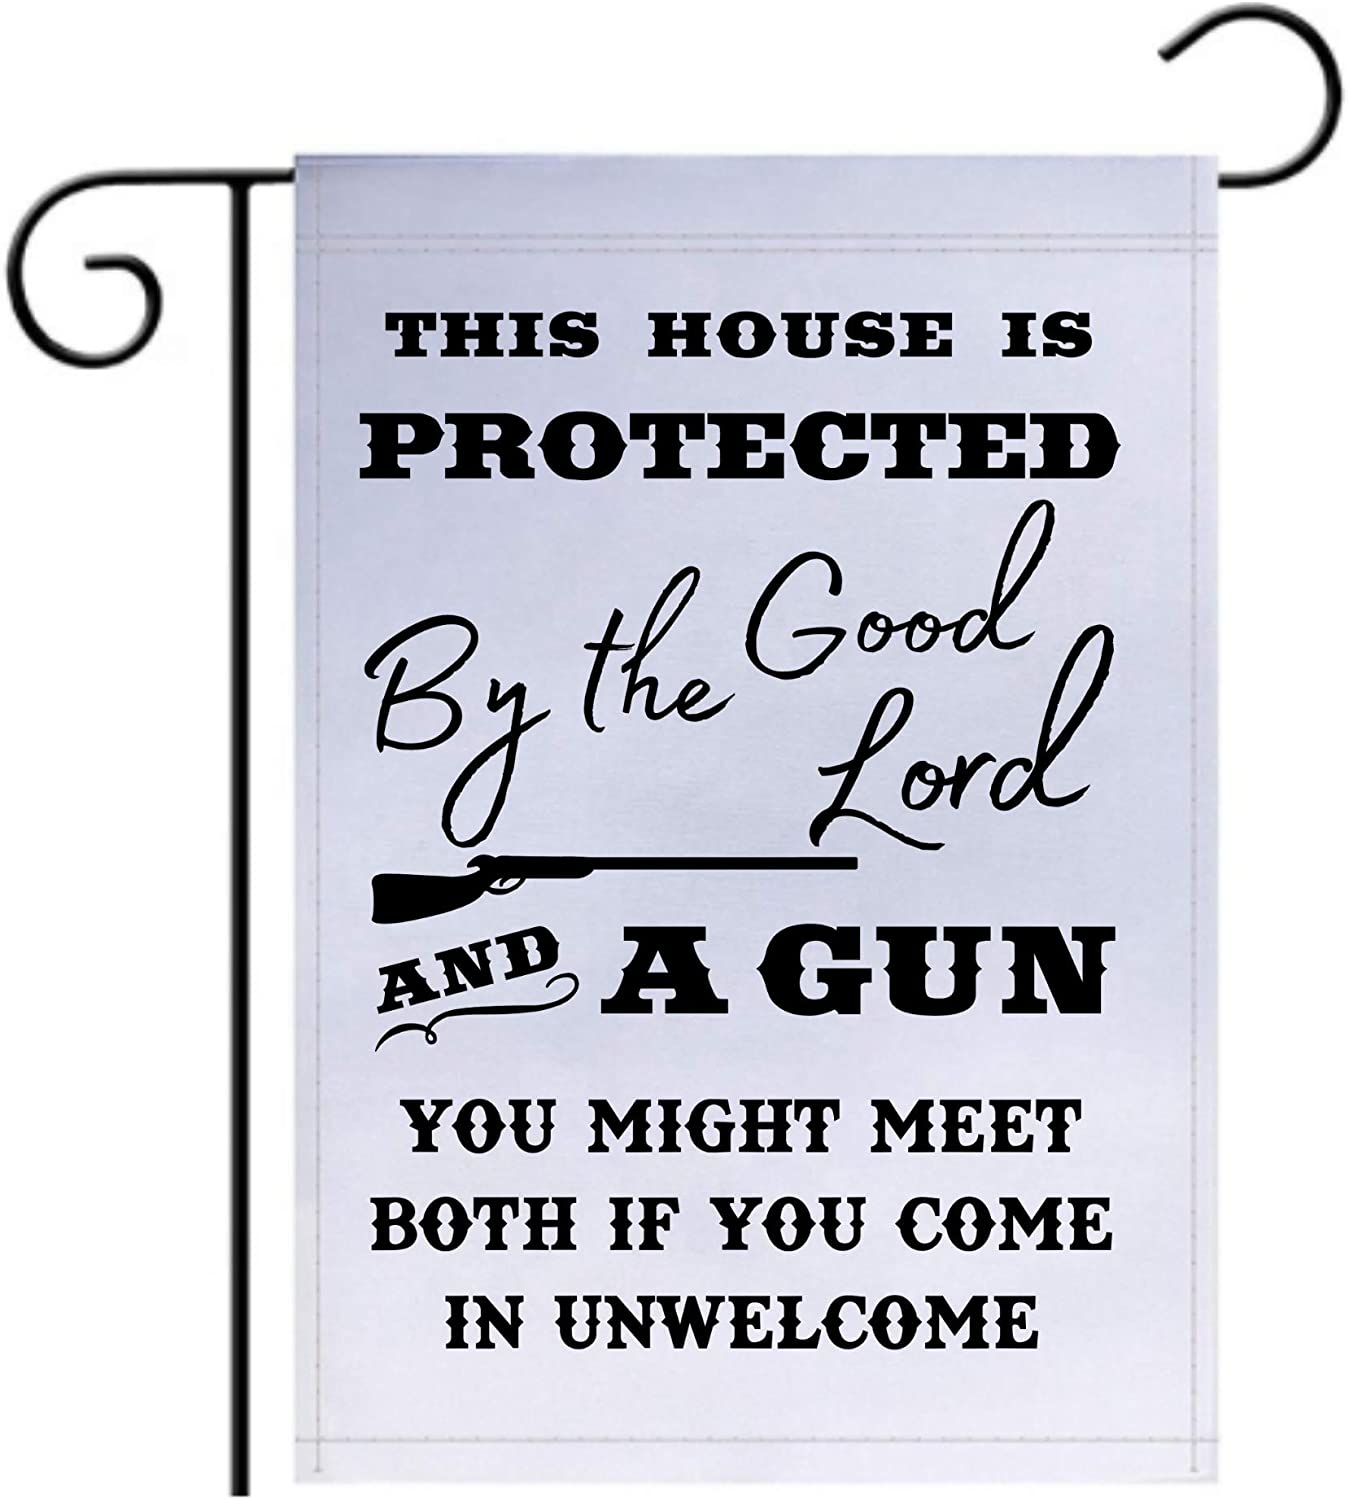 This House is Protected By The Good Lord and a Gun 18"x12" Garden Flag